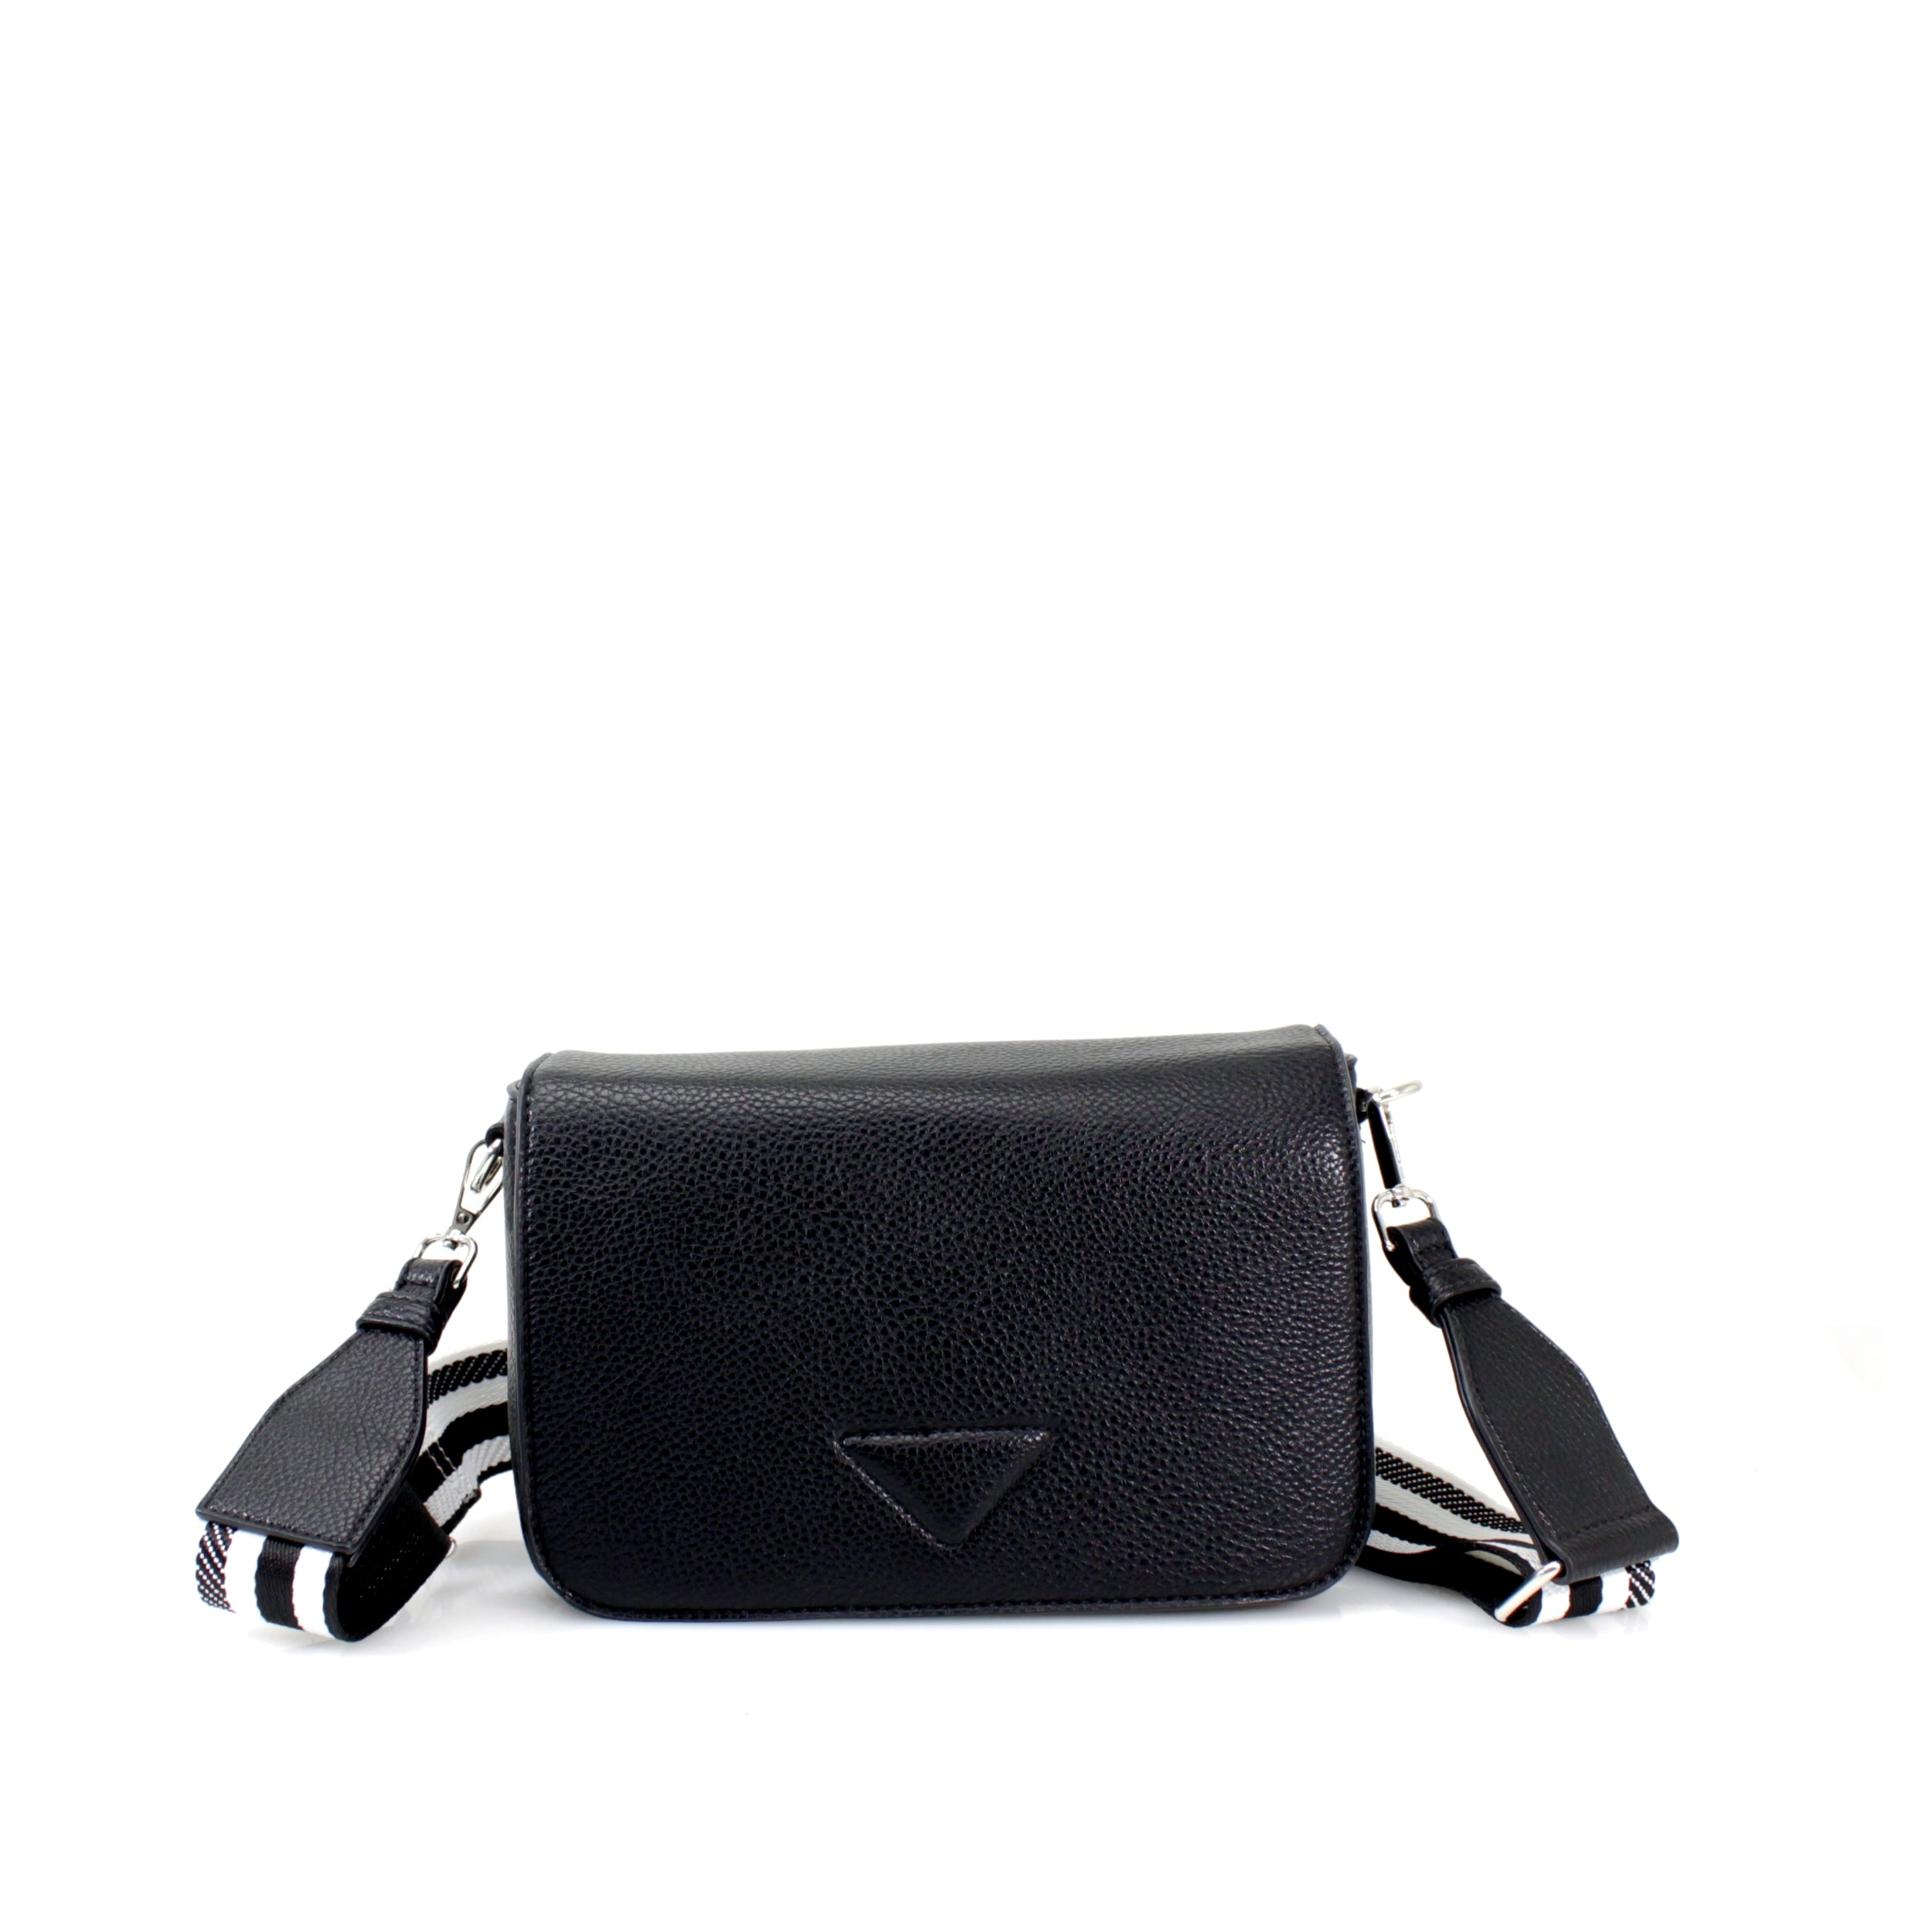 Craze London Crossbody Bag Flap over finished with magdot